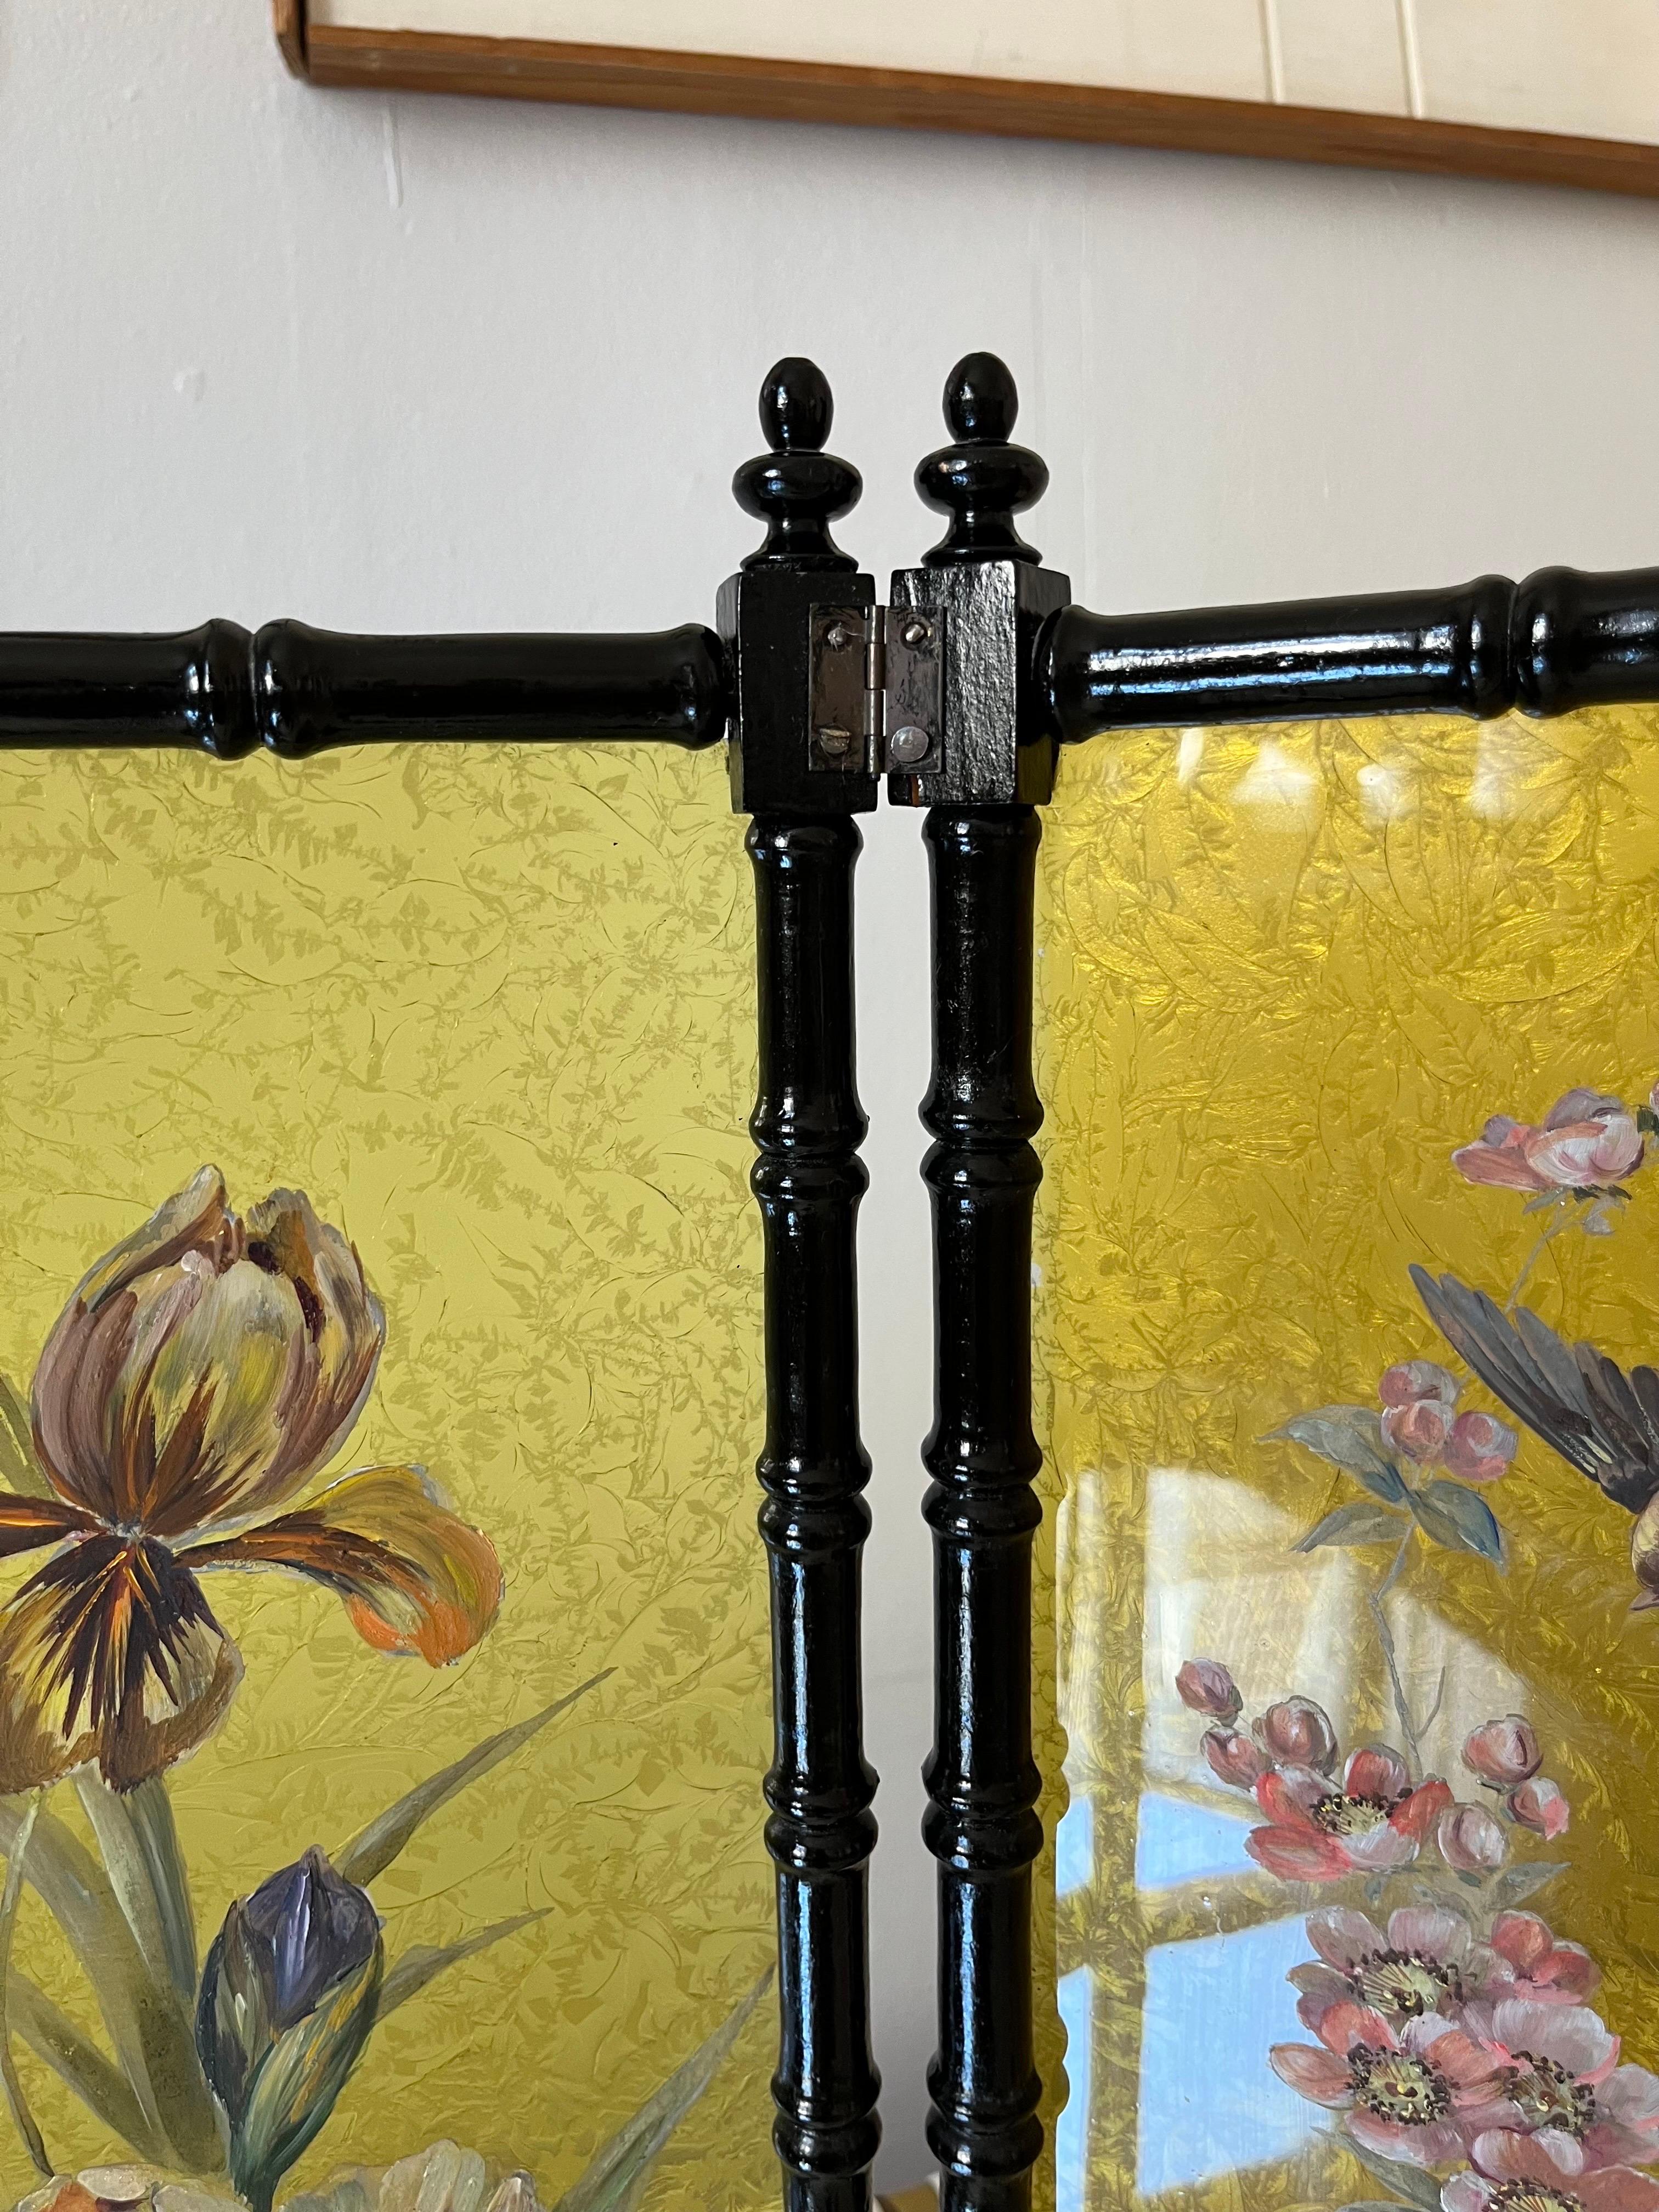 Antique Swedish Hand-Painted Decorative Three-Panel Glass Screen

Exquisite antique Swedish hand-painted decorative three-panel screen. Crafted with finely carved and intricately detailed black-painted wood frames featuring beautiful curved forms,